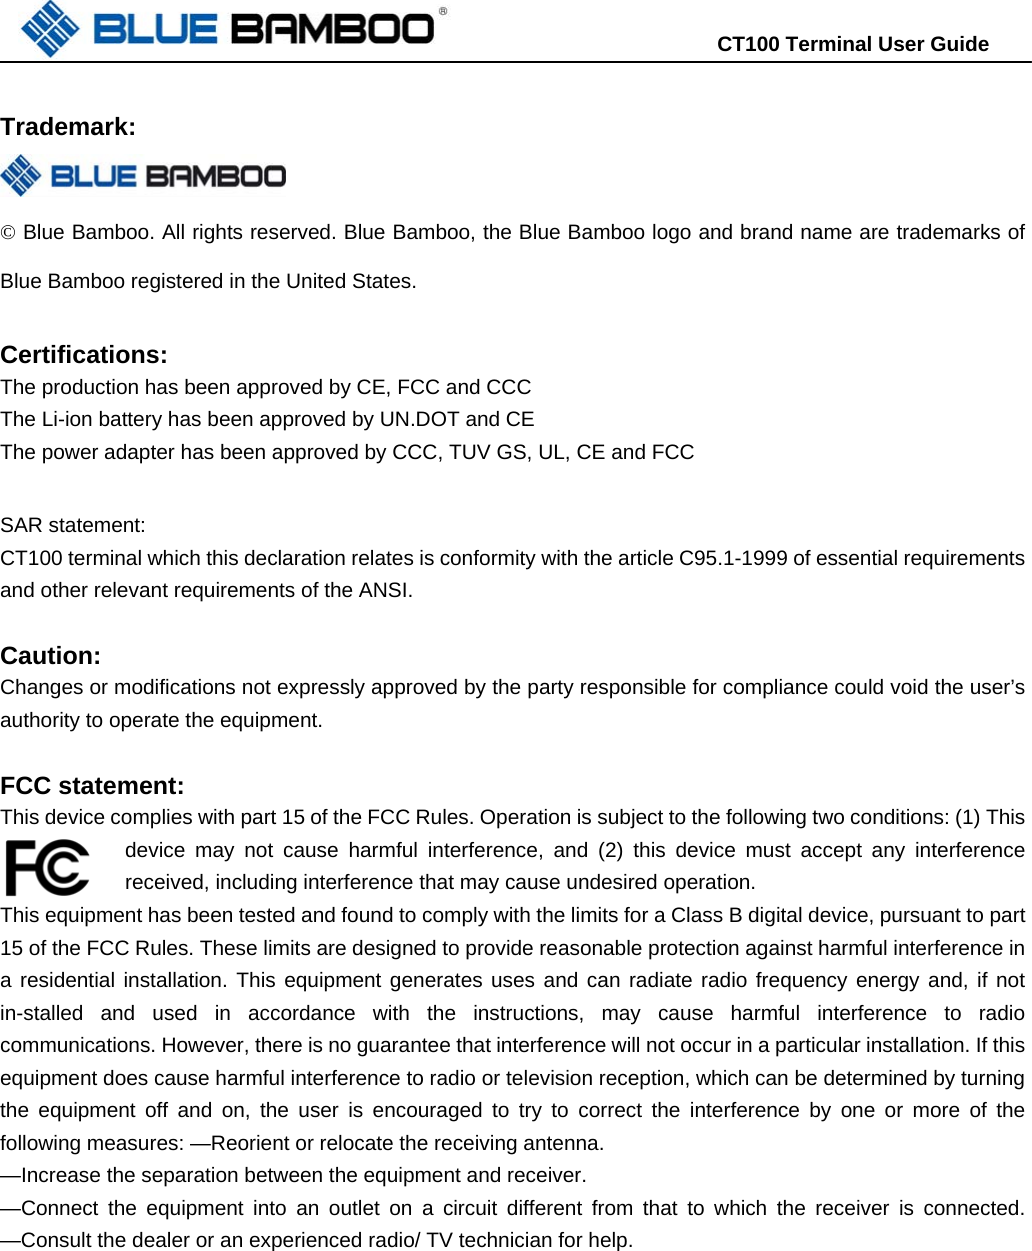                                                                      CT100 Terminal User Guide   Trademark:   © Blue Bamboo. All rights reserved. Blue Bamboo, the Blue Bamboo logo and brand name are trademarks of Blue Bamboo registered in the United States.    Certifications: The production has been approved by CE, FCC and CCC The Li-ion battery has been approved by UN.DOT and CE The power adapter has been approved by CCC, TUV GS, UL, CE and FCC  SAR statement: CT100 terminal which this declaration relates is conformity with the article C95.1-1999 of essential requirements and other relevant requirements of the ANSI.    Caution: Changes or modifications not expressly approved by the party responsible for compliance could void the user’s authority to operate the equipment.  FCC statement: This device complies with part 15 of the FCC Rules. Operation is subject to the following two conditions: (1) This device may not cause harmful interference, and (2) this device must accept any interference received, including interference that may cause undesired operation. This equipment has been tested and found to comply with the limits for a Class B digital device, pursuant to part 15 of the FCC Rules. These limits are designed to provide reasonable protection against harmful interference in a residential installation. This equipment generates uses and can radiate radio frequency energy and, if not in-stalled and used in accordance with the instructions, may cause harmful interference to radio communications. However, there is no guarantee that interference will not occur in a particular installation. If this equipment does cause harmful interference to radio or television reception, which can be determined by turning the equipment off and on, the user is encouraged to try to correct the interference by one or more of the following measures: —Reorient or relocate the receiving antenna.   —Increase the separation between the equipment and receiver.   —Connect the equipment into an outlet on a circuit different from that to which the receiver is connected. —Consult the dealer or an experienced radio/ TV technician for help.  